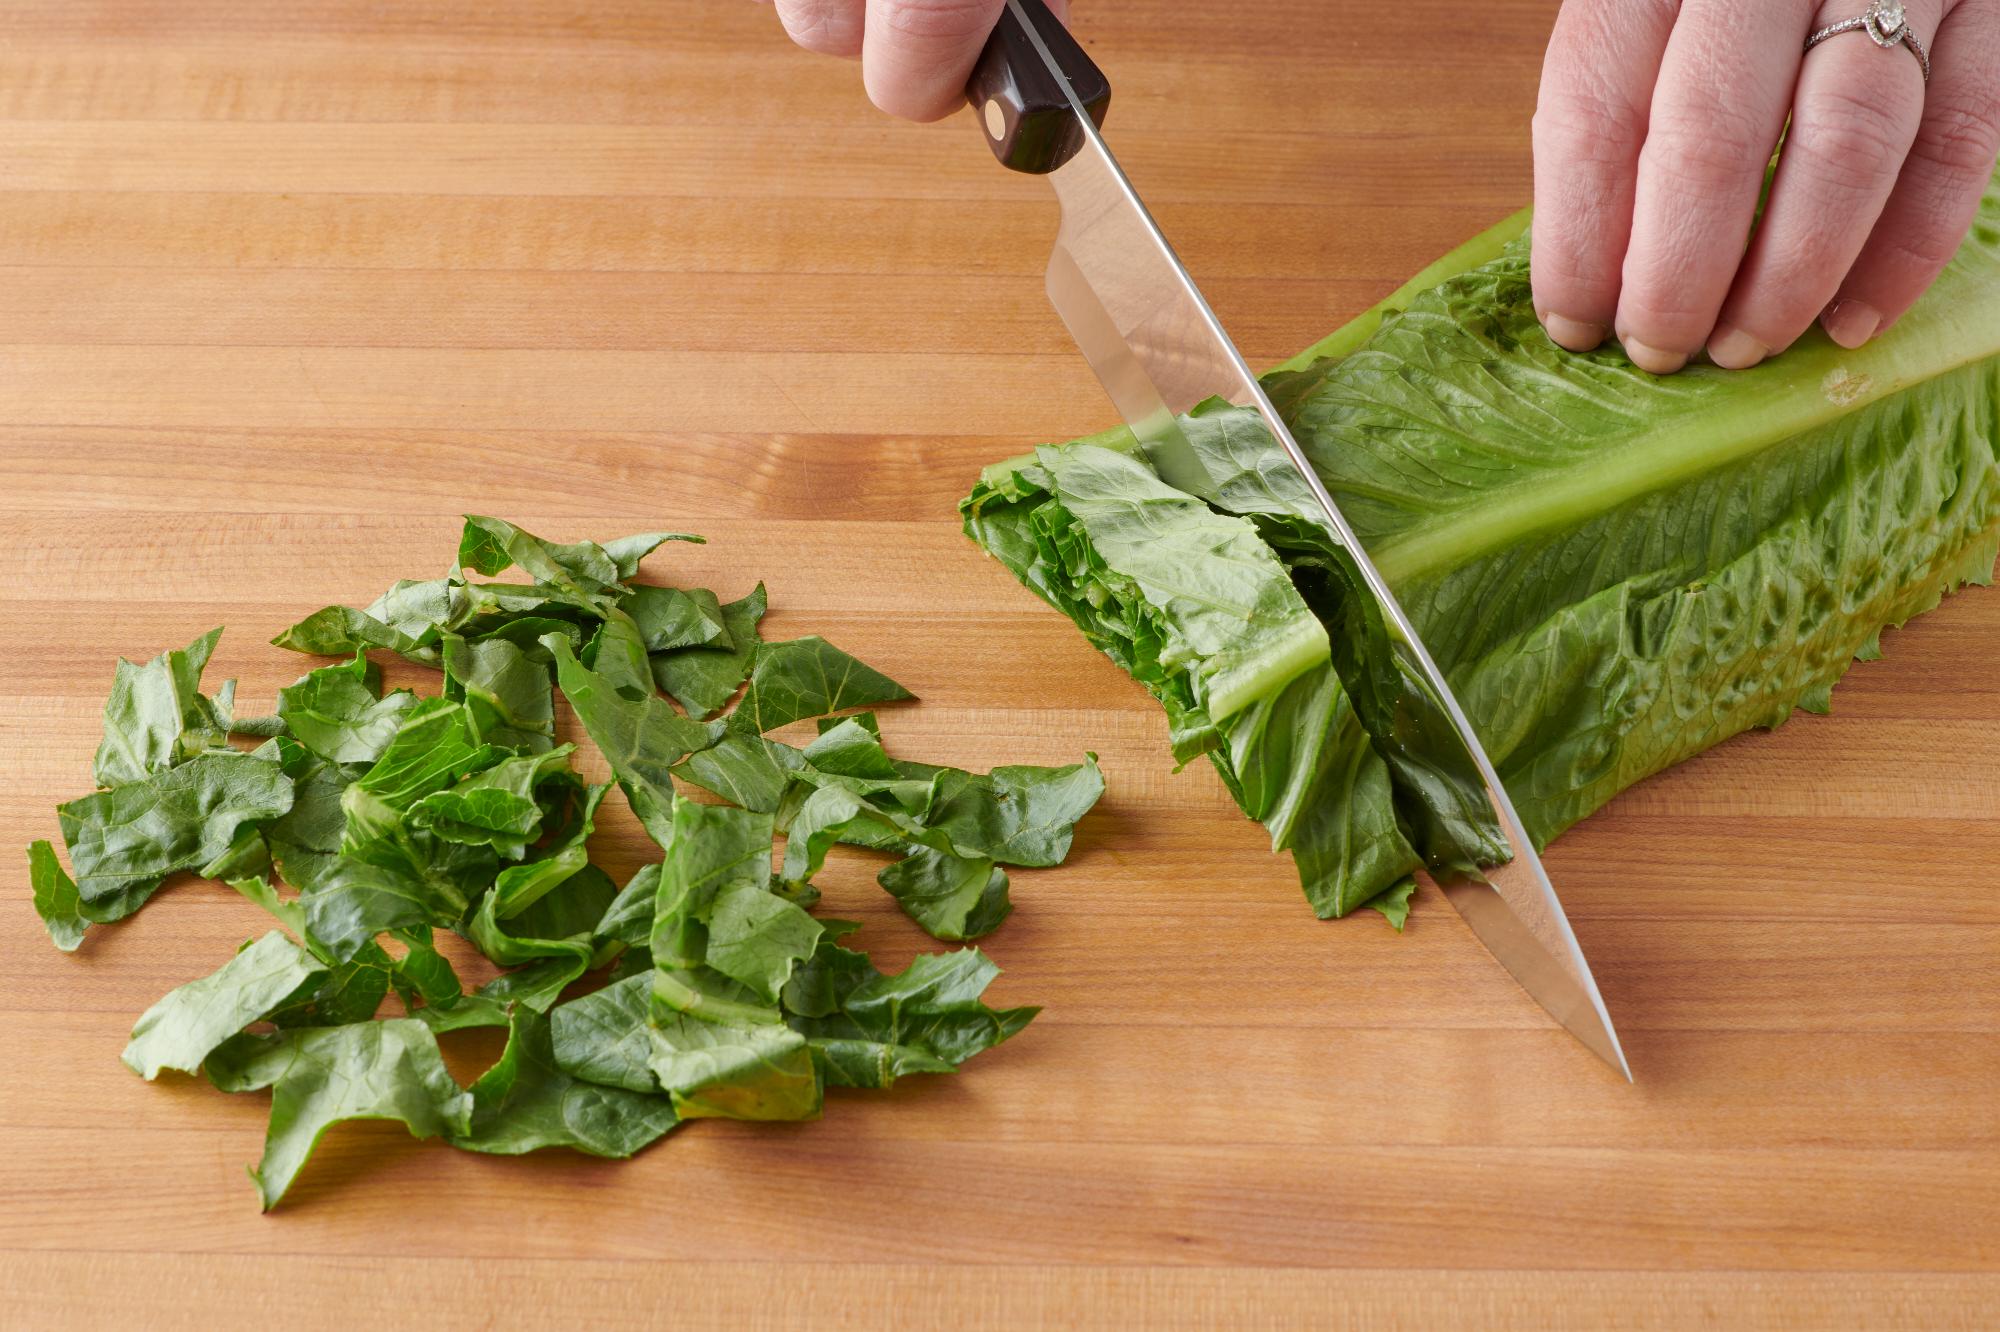 Chopping romaine with a Petite Chef.